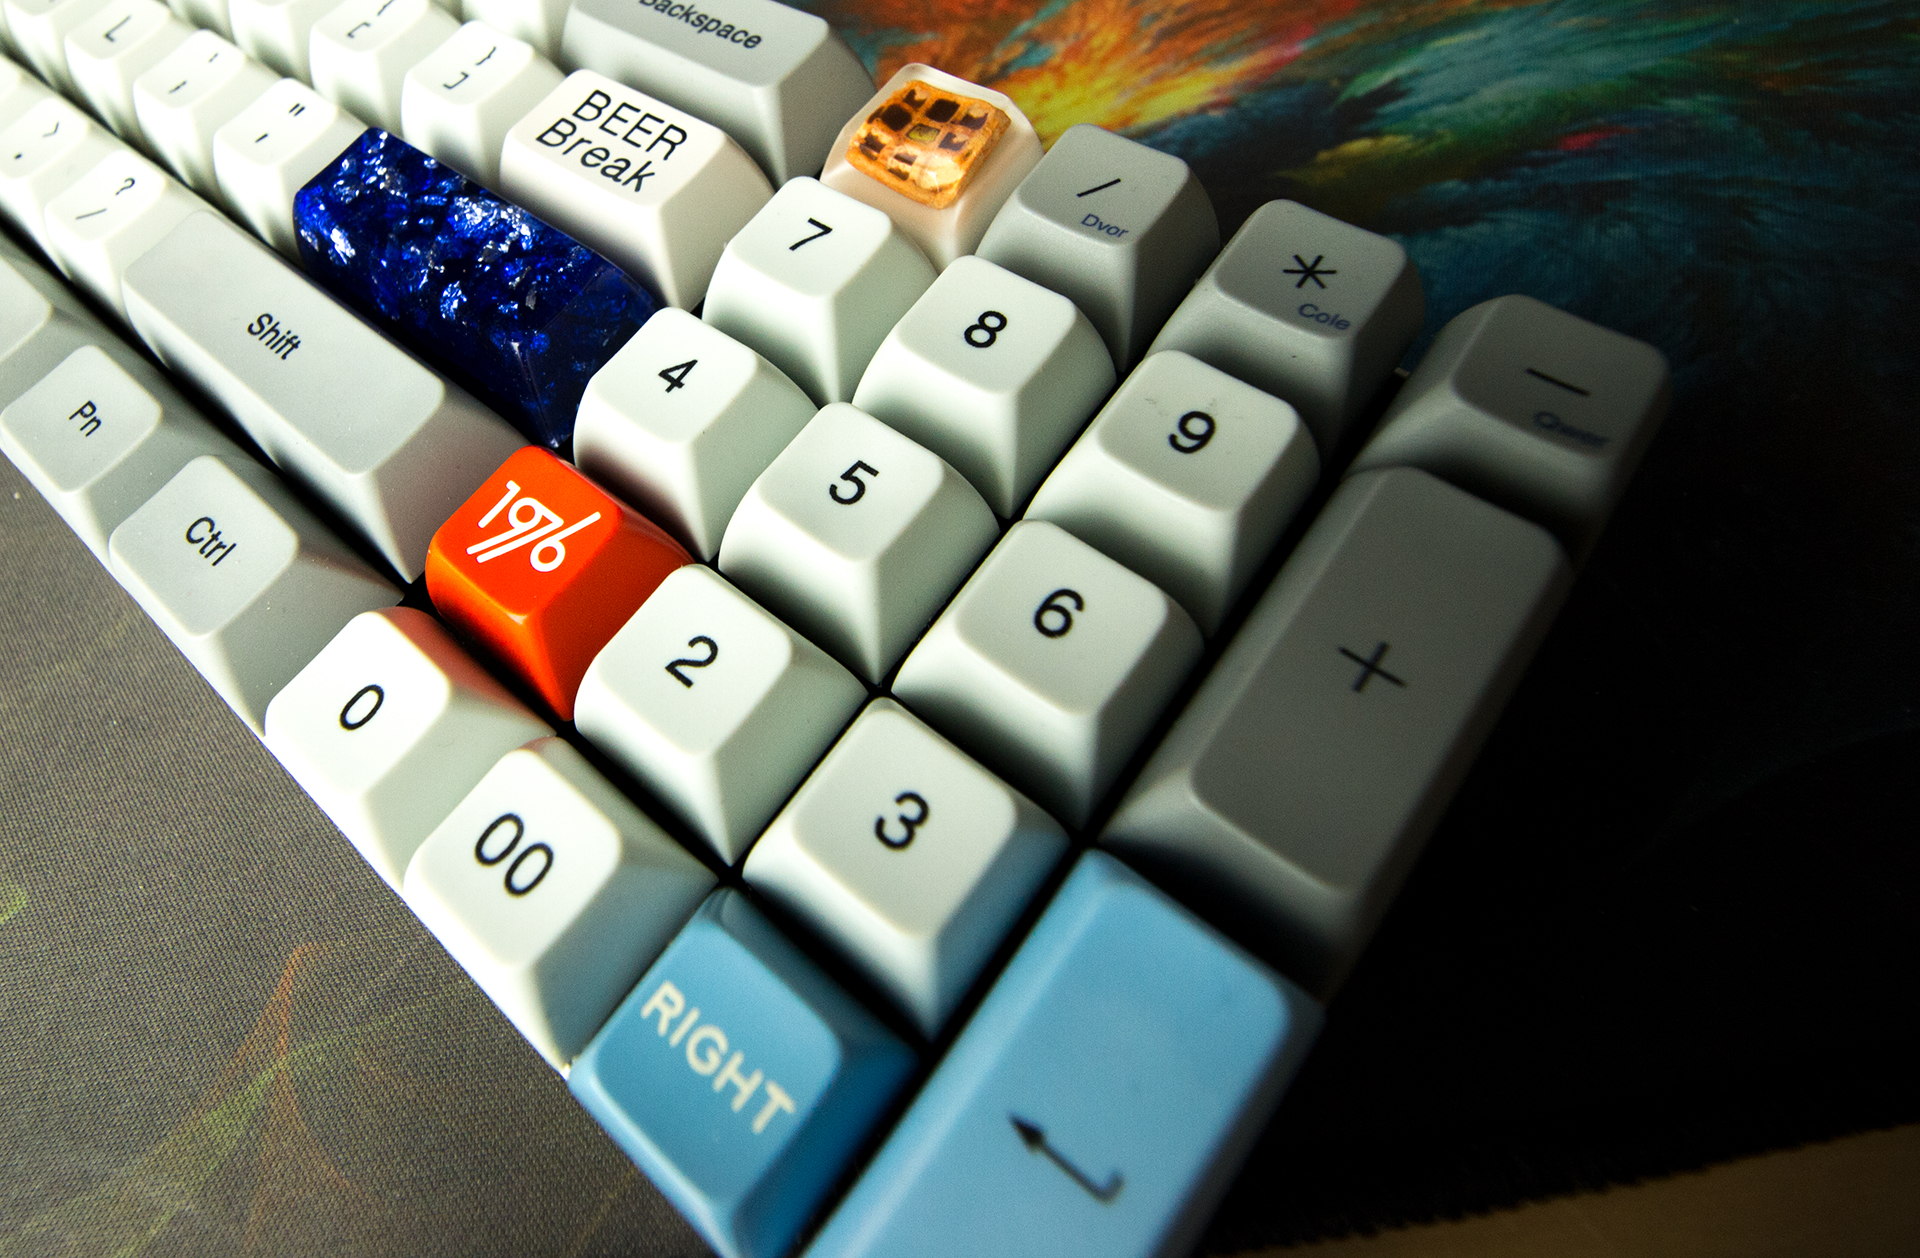 Vortex Vibe Keyboard Review: Smaller By The Numbers